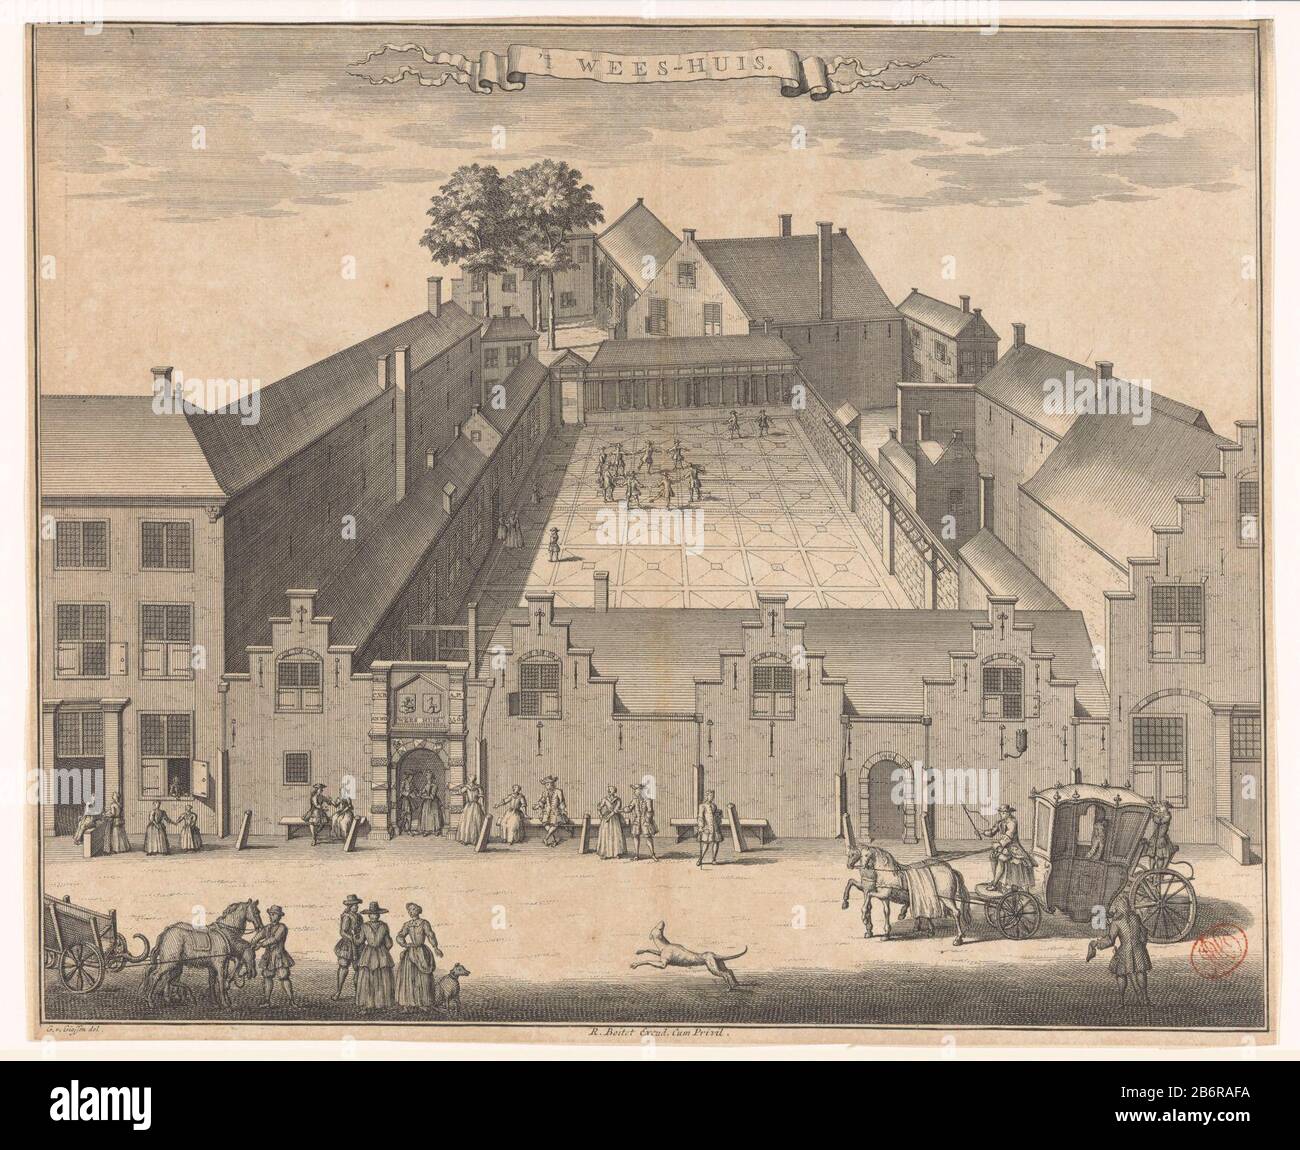 Gezicht op het Burgerweeshuis te Den Haag 't Wees-huis (titel op object) View of the orphanage in the Hague since 1576 located in the former Convent of Saint Agnes Westeinde. Children playing in the courtyard. At the state different figures, and a koets. Manufacturer : print maker: anonymously to drawing of: Gerrit van Giessen (indicated on object) publisher: Reinier Boitet (indicated on object) publisher: Adrianus Douci Pietersz Grantor of privilege: unknown (indicated on object) Place manufacture: to order of: the Hague Publisher: Delft Publisher: Amsterdam Date: 1730 - 1736 Material: paper Stock Photo